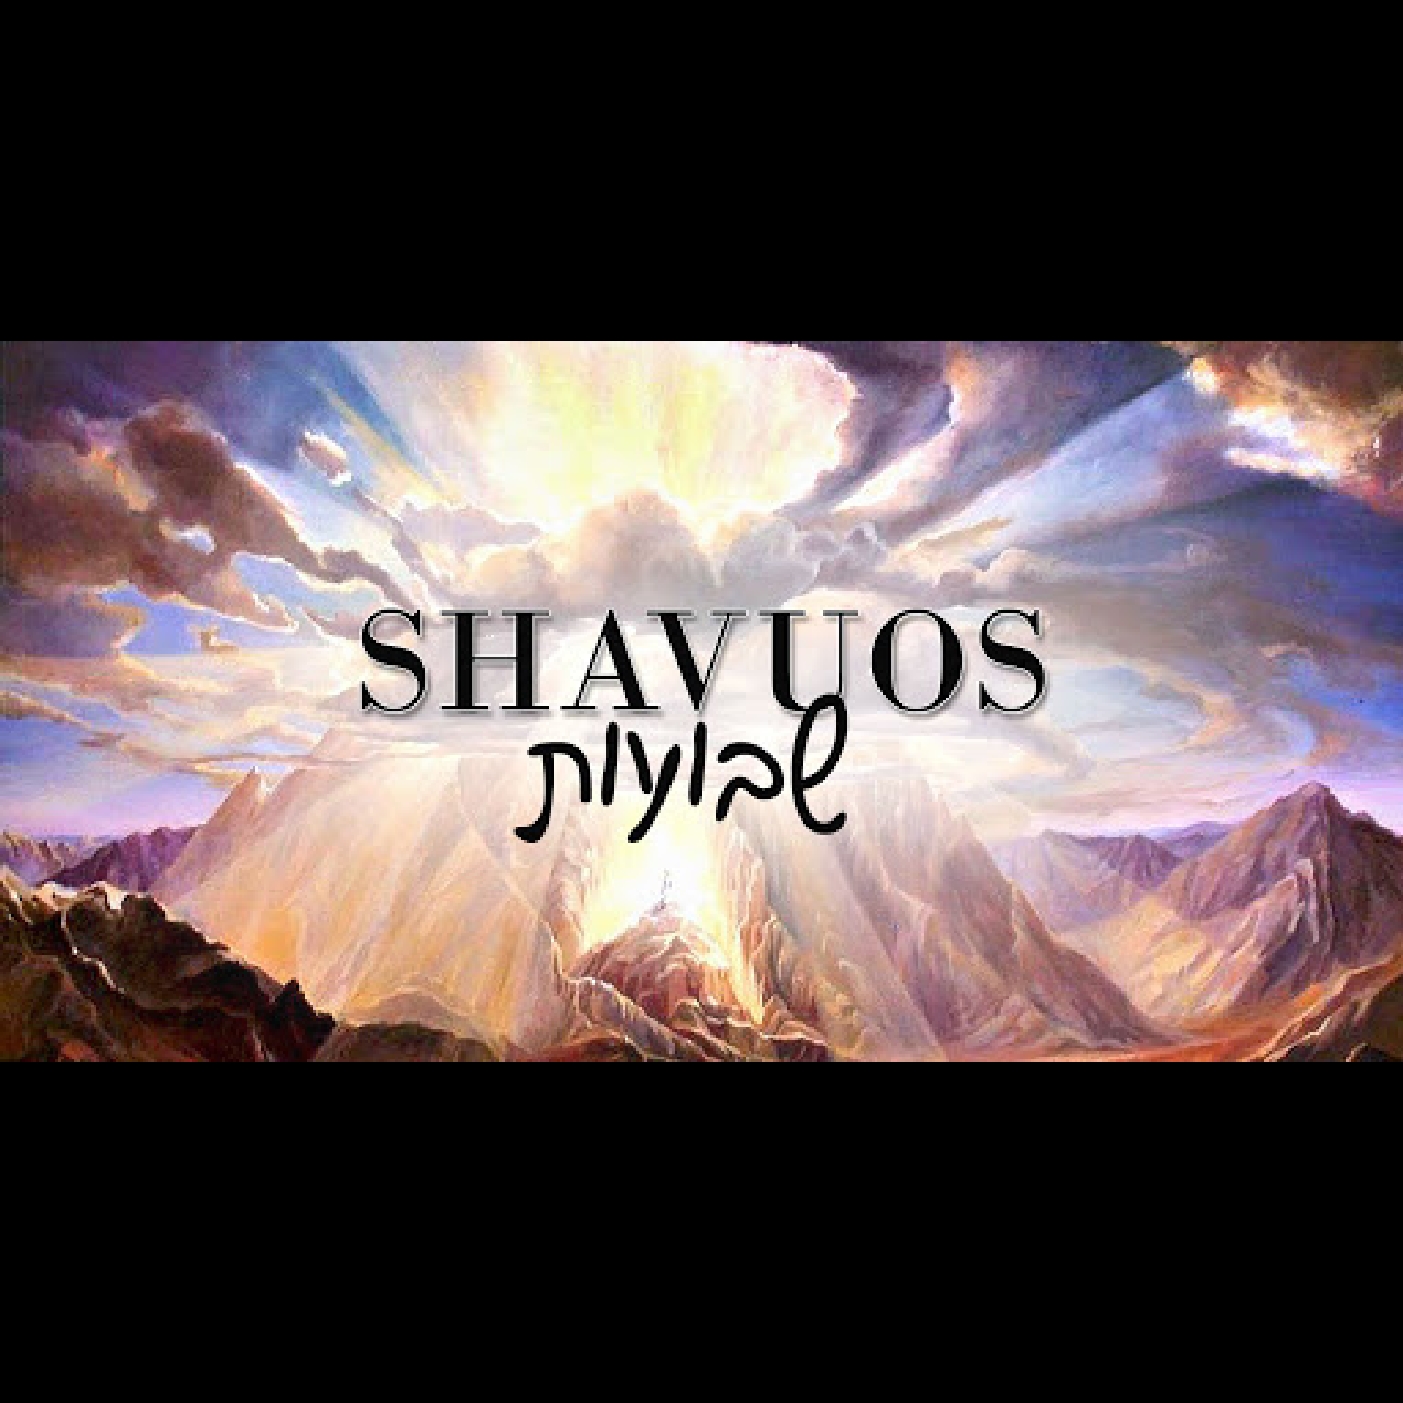 Shavuos - The Yoke's On You!! Why we are happy to carry the burden of Torah.